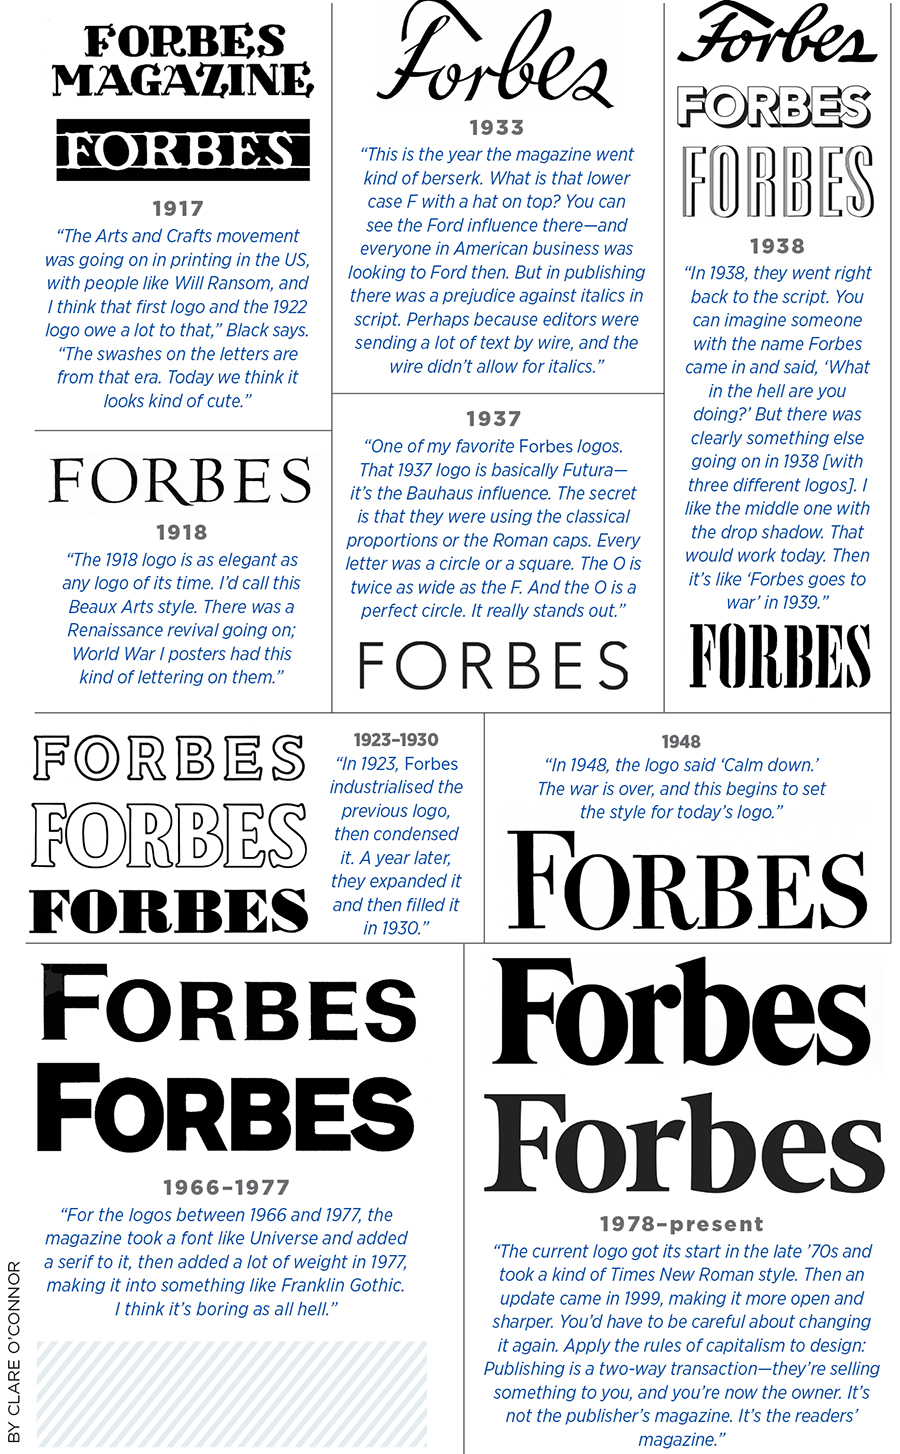 Forbes @ 100: How the brand's logo changed over a century